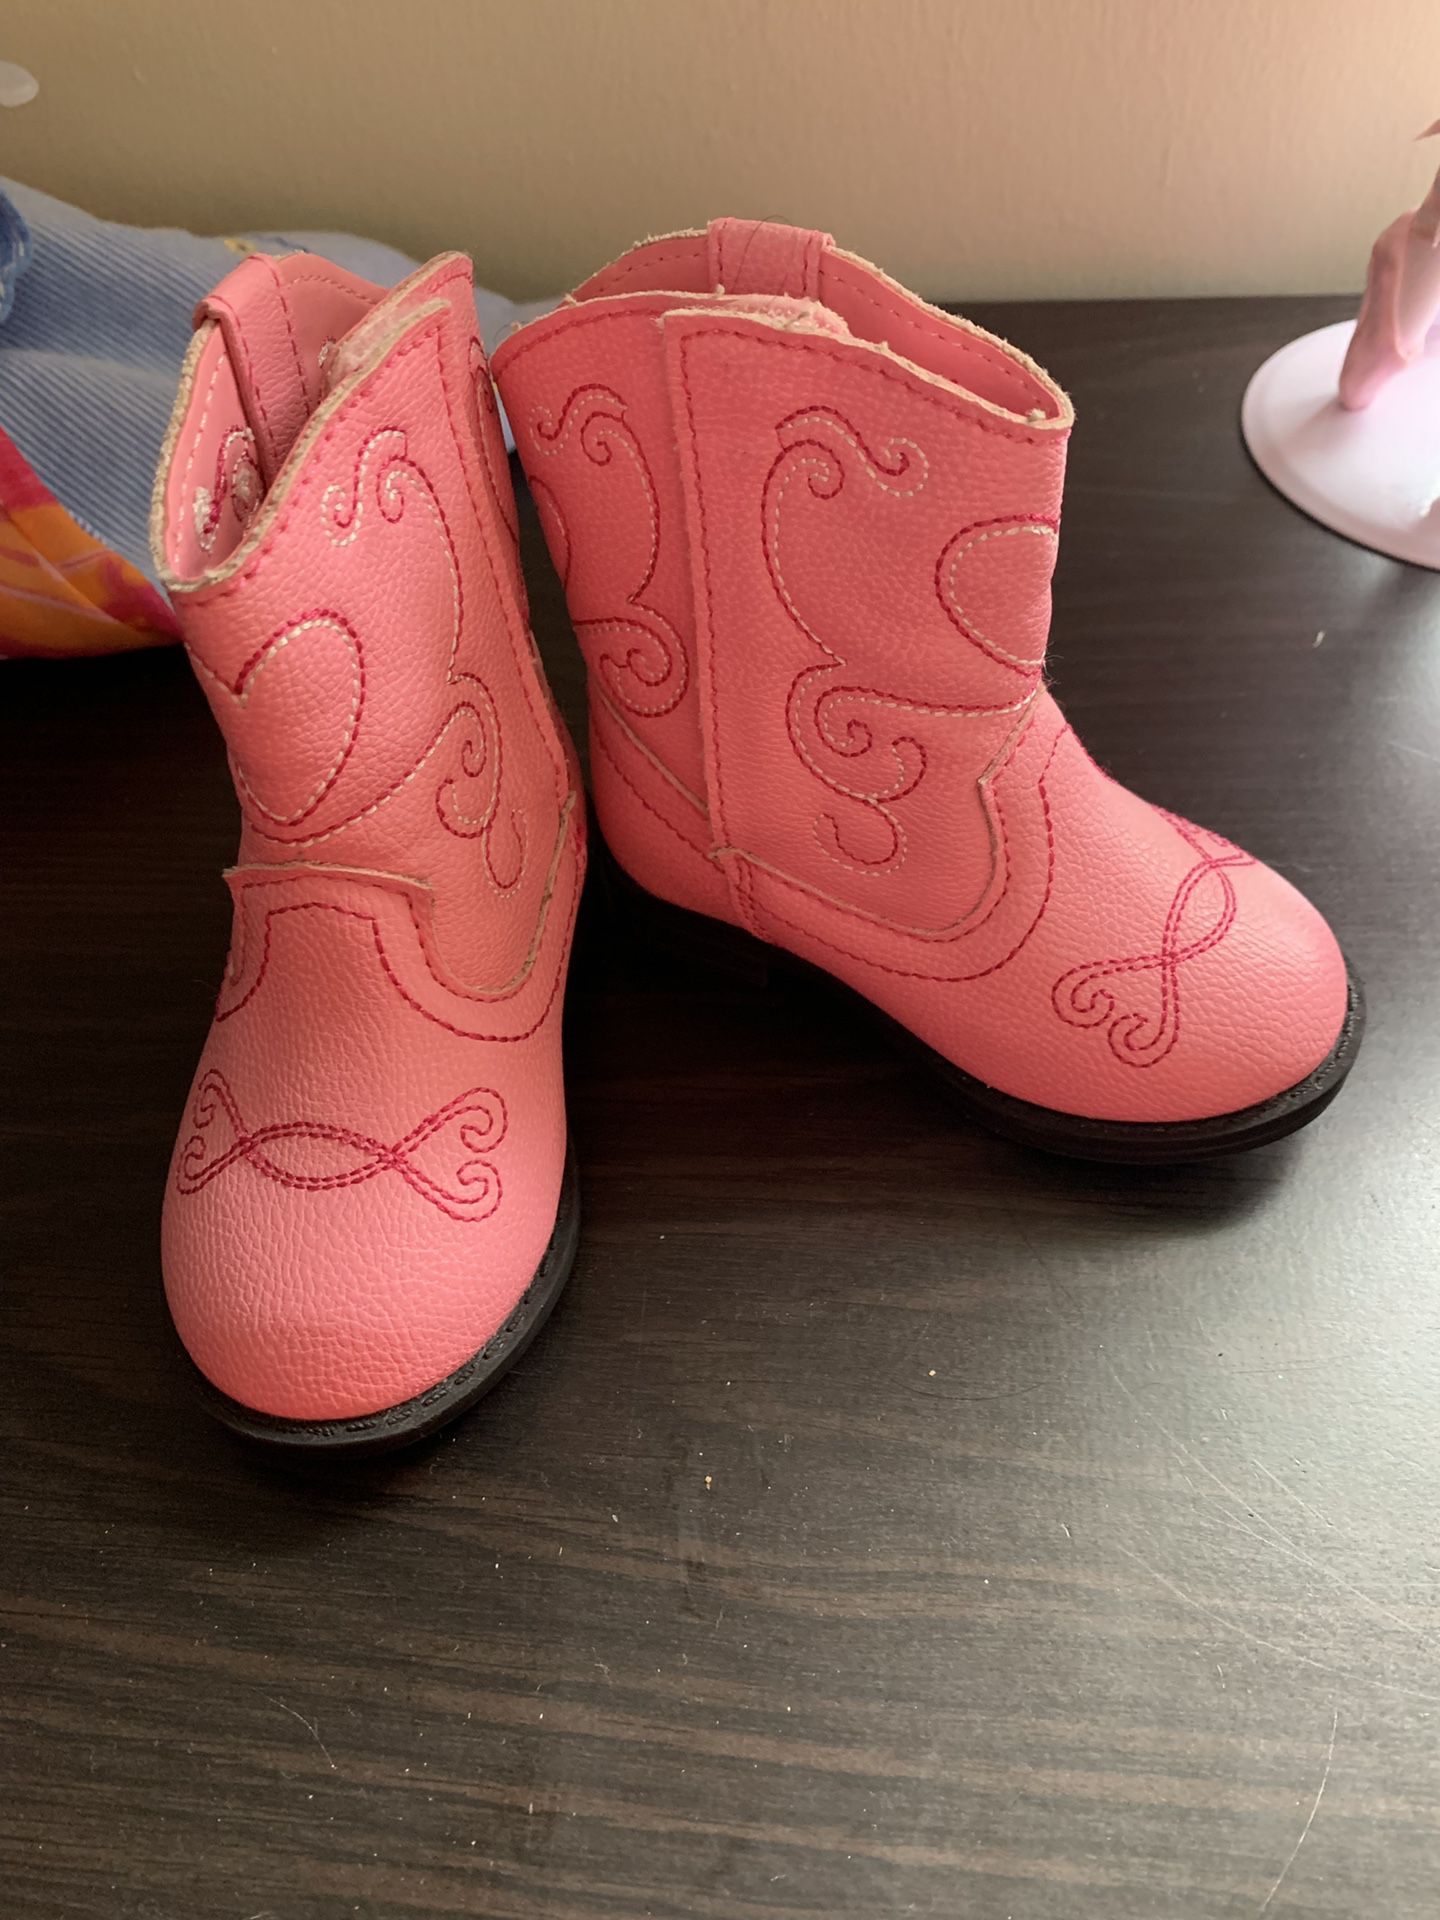 Baby girl boots size 3 both pairs